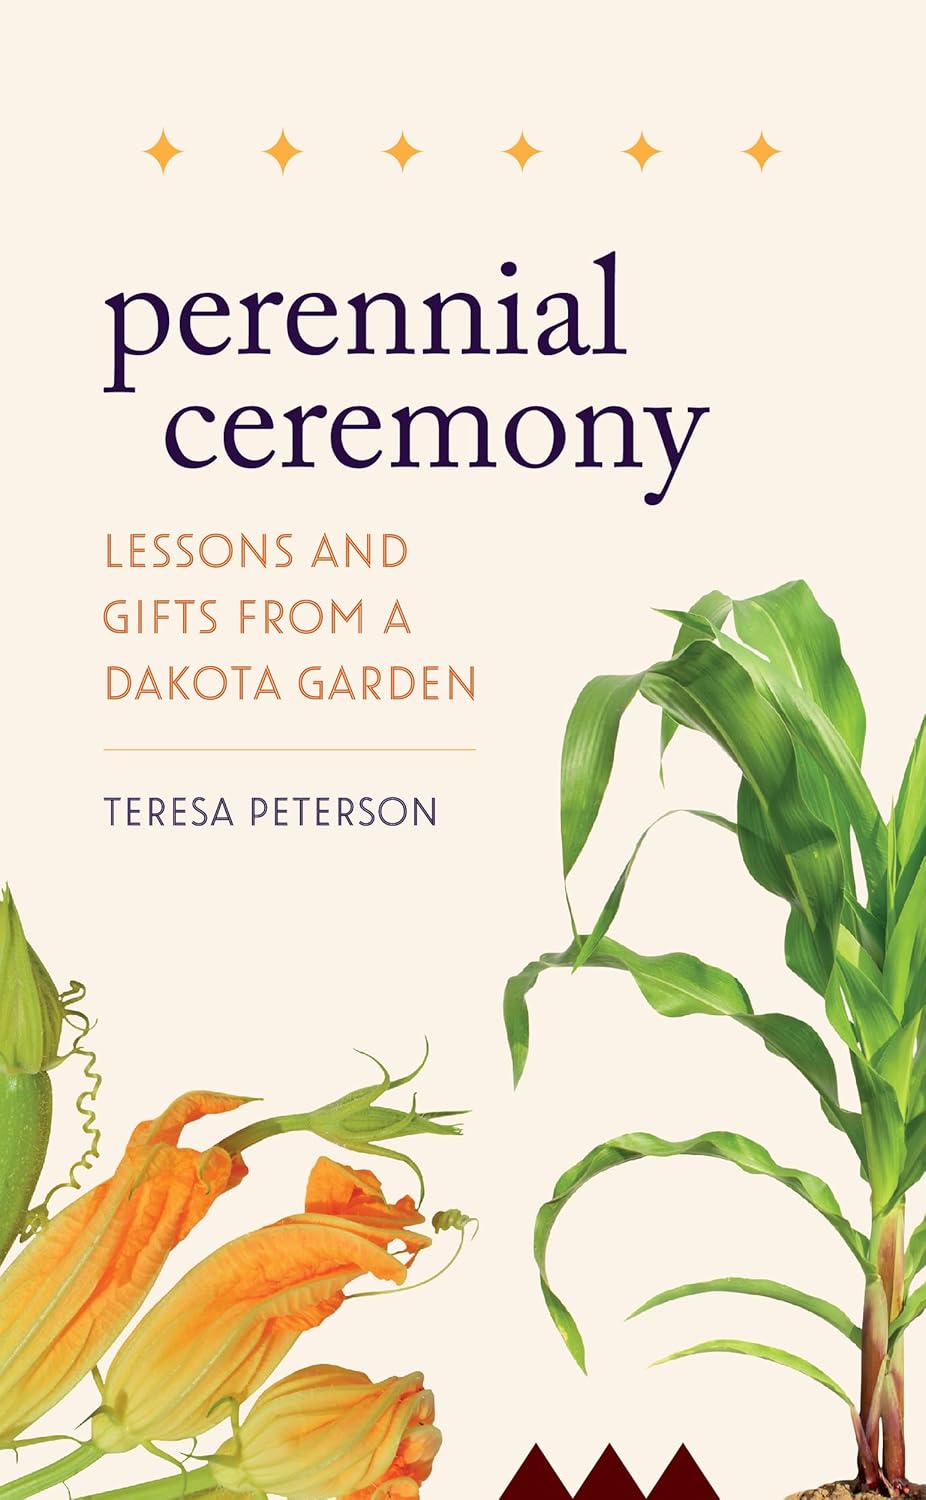 Perennial Ceremony: Lessons and Gifts from a Dakota Garden